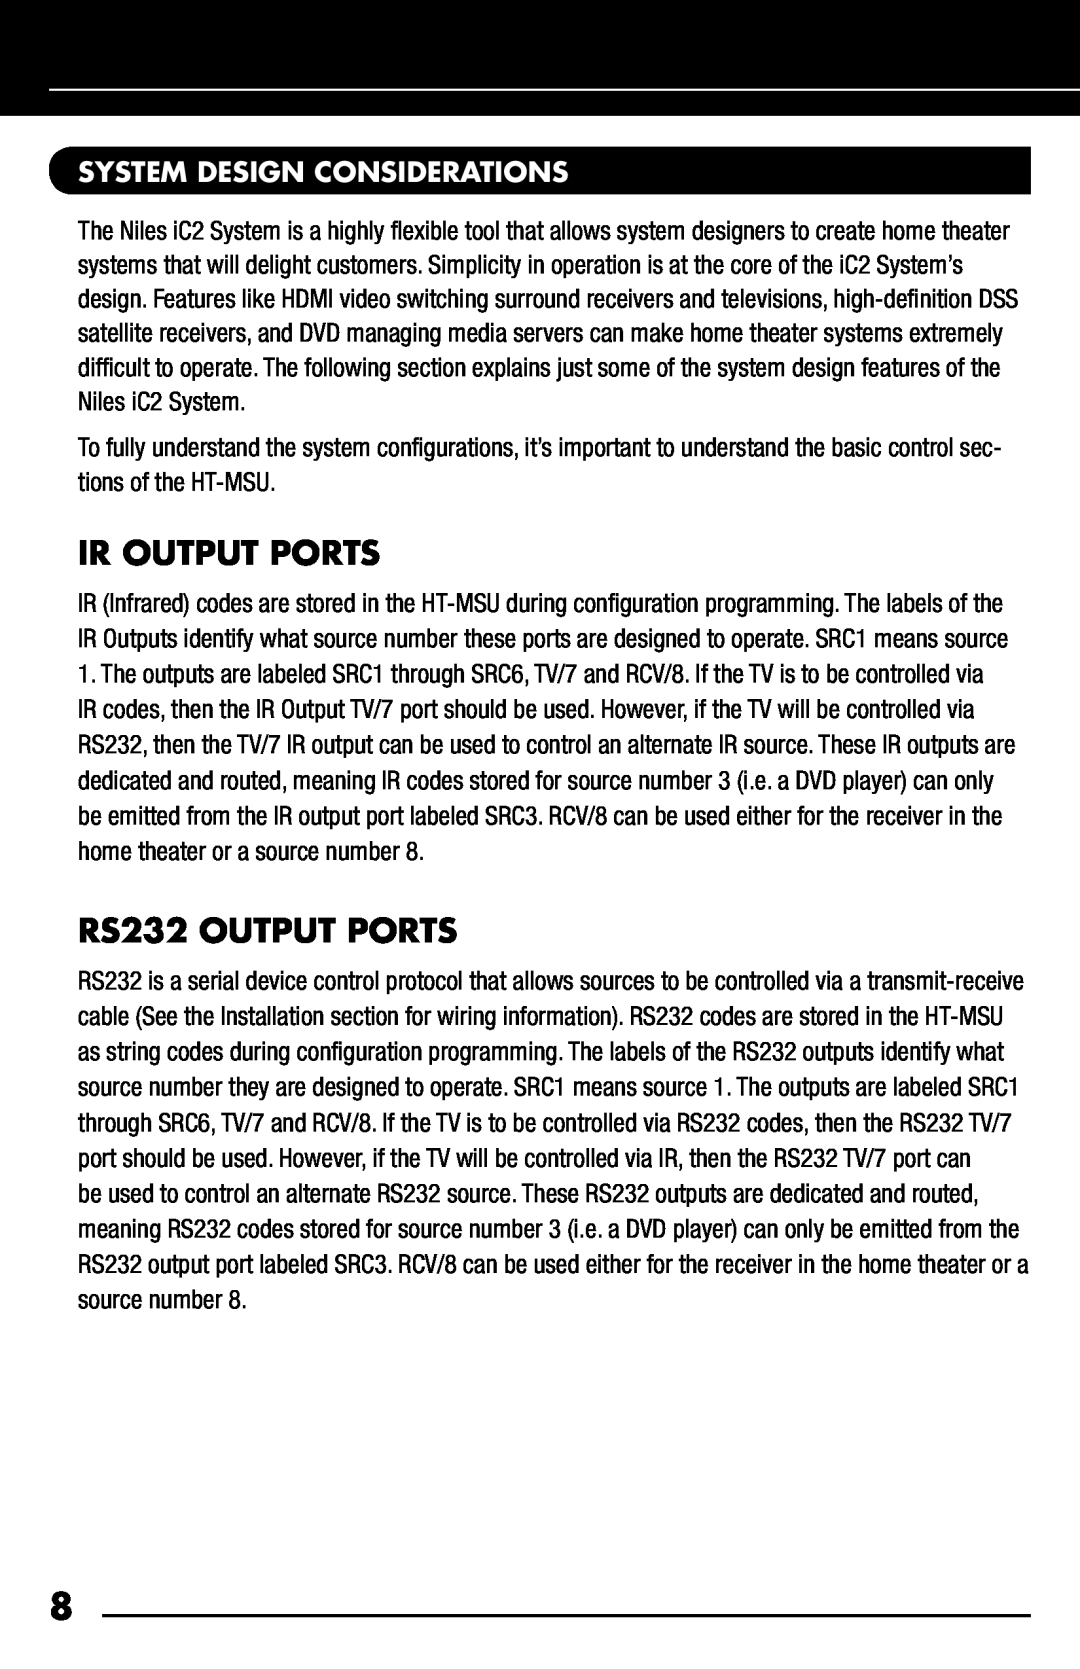 Niles Audio iC2 manual Ir Output Ports, RS232 OUTPUT PORTS, System Design Considerations 